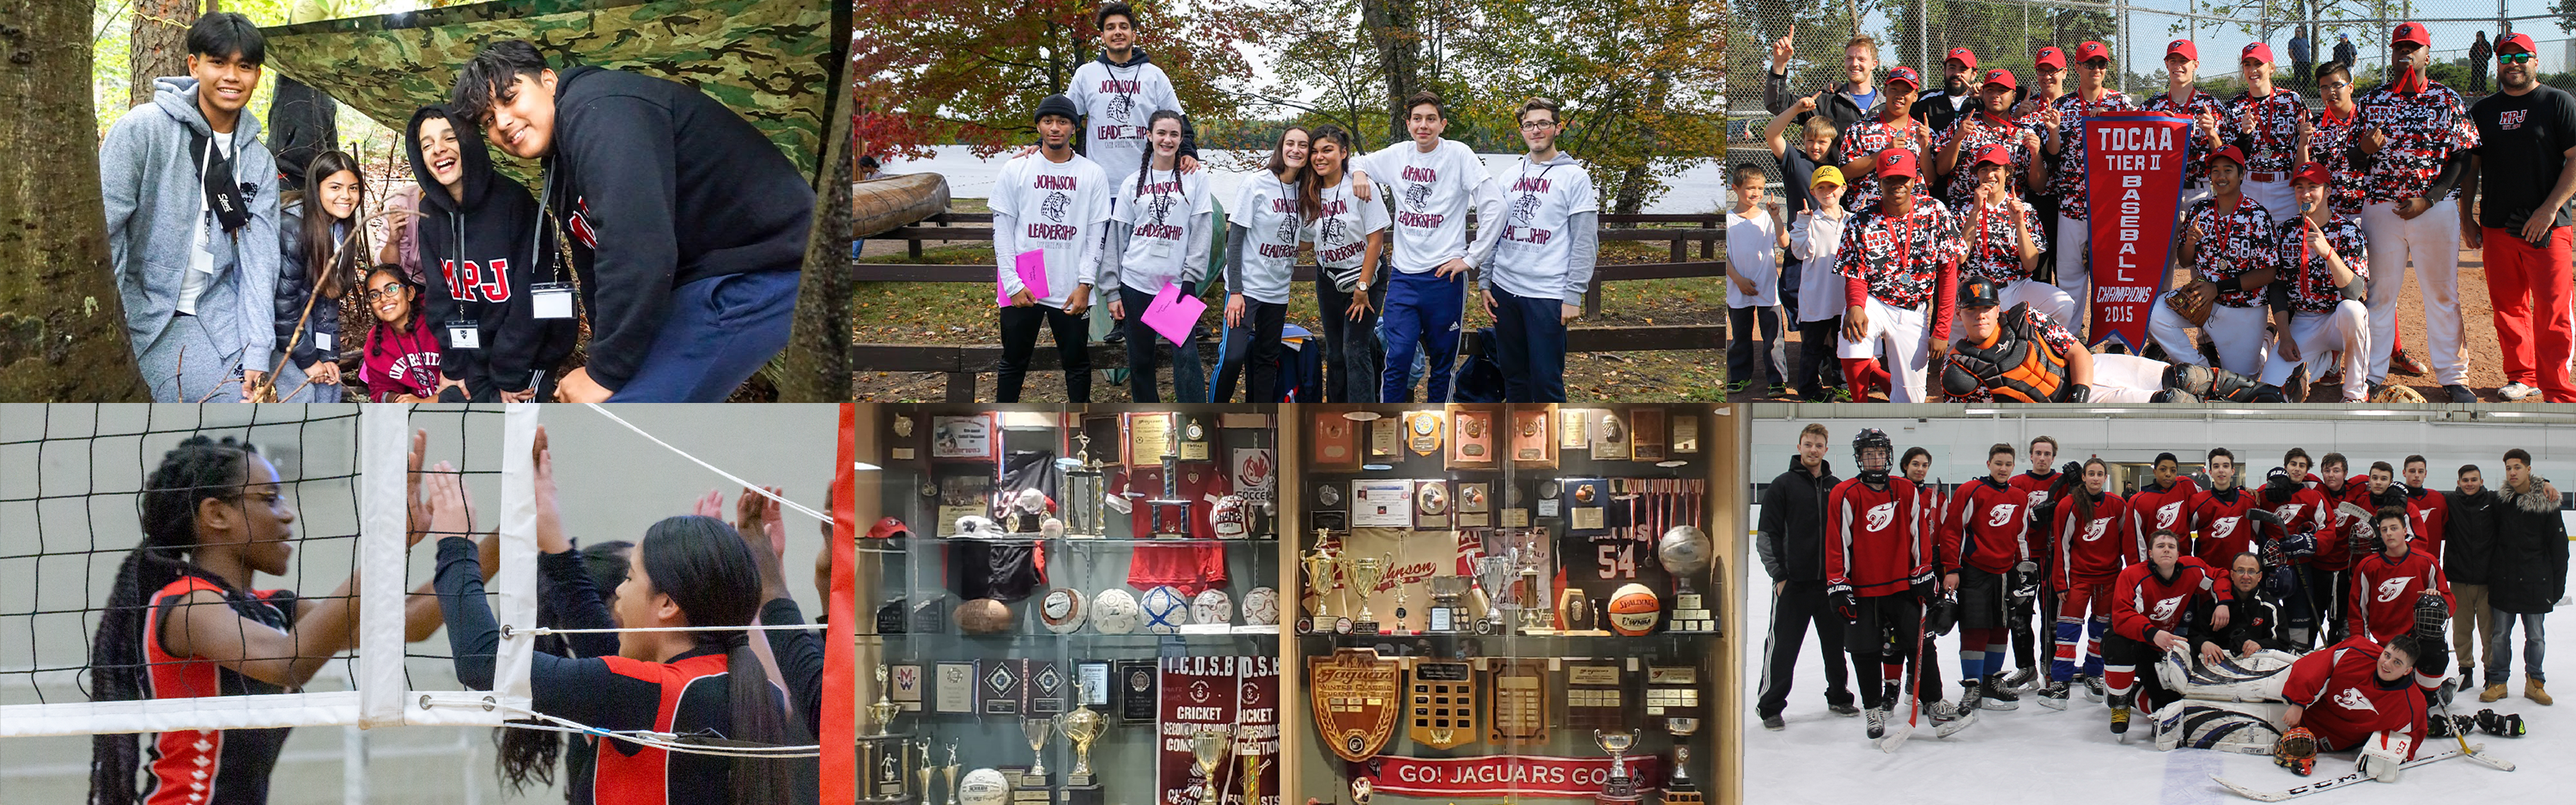 Top  left, a group of students at a leadership camp retreat. Top middle, a group photo of students on the Johnson Leadership team. Top right, group photo of the baseball team with their championship banner. Bottom left, intramural volleyball players. Bottom middle, MPJ trophy case. Bottom right, group photo of hockey team on the ice.